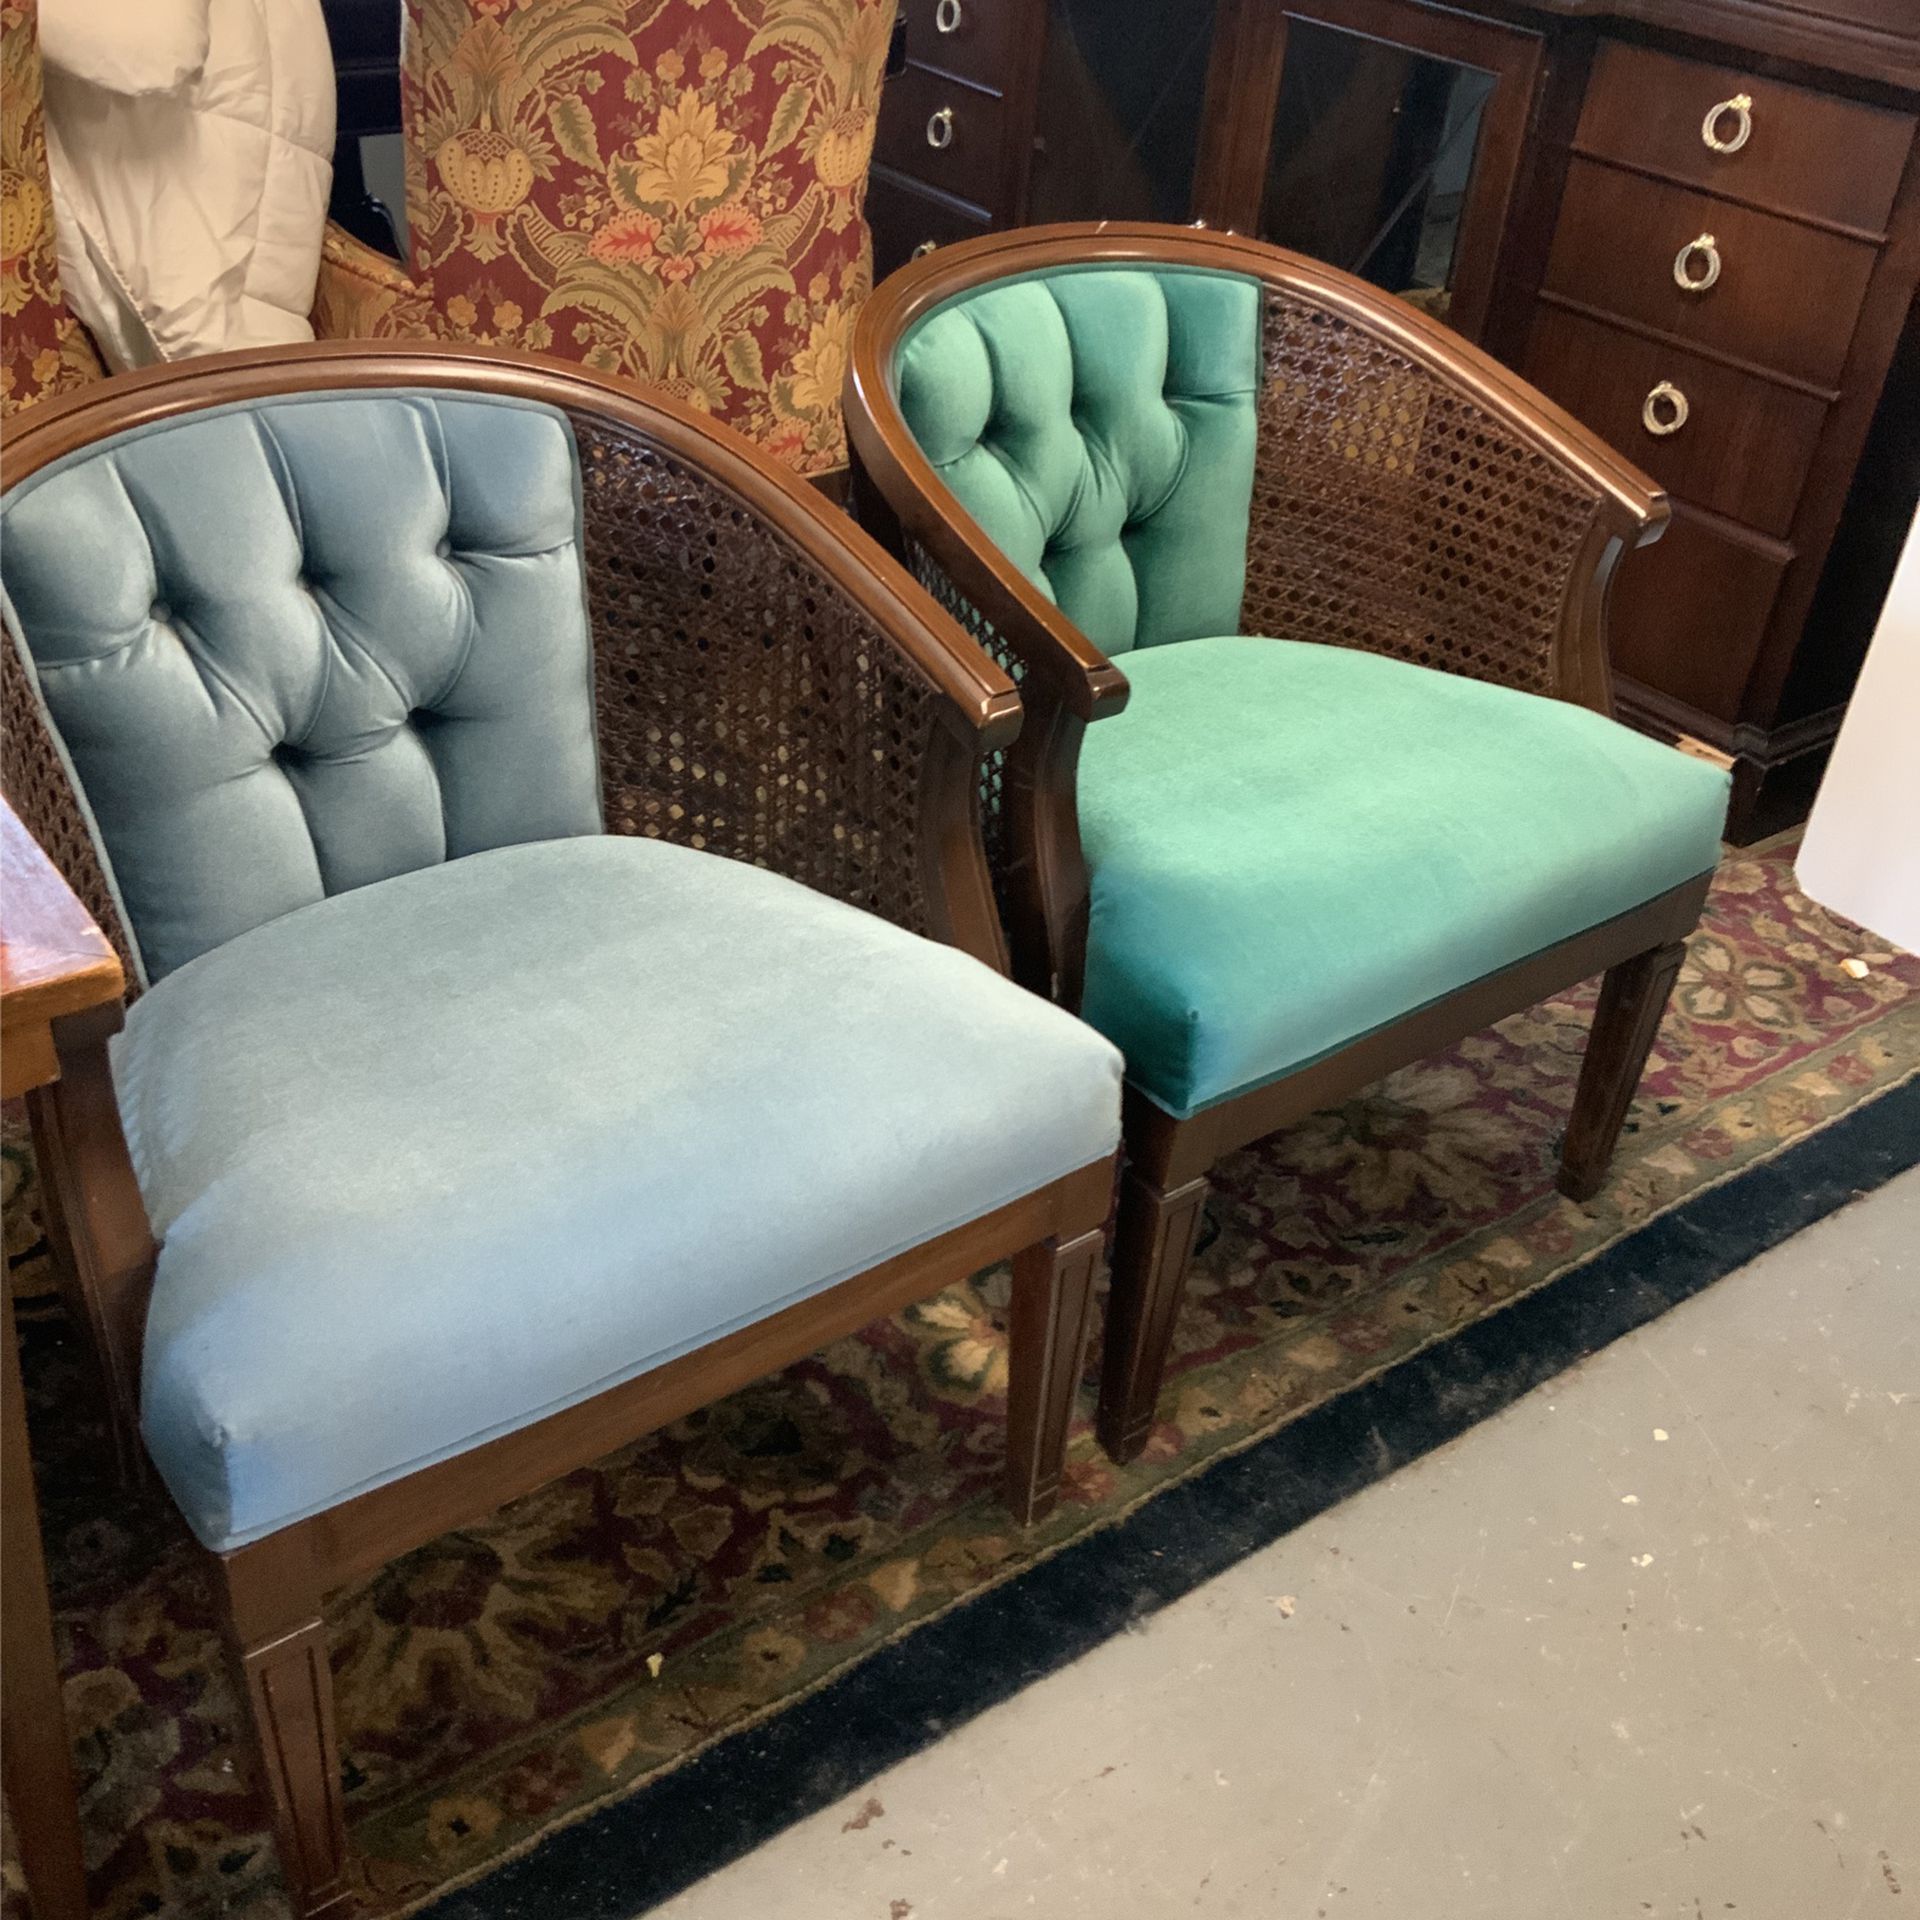 Vintage Chairs (sold Separate)